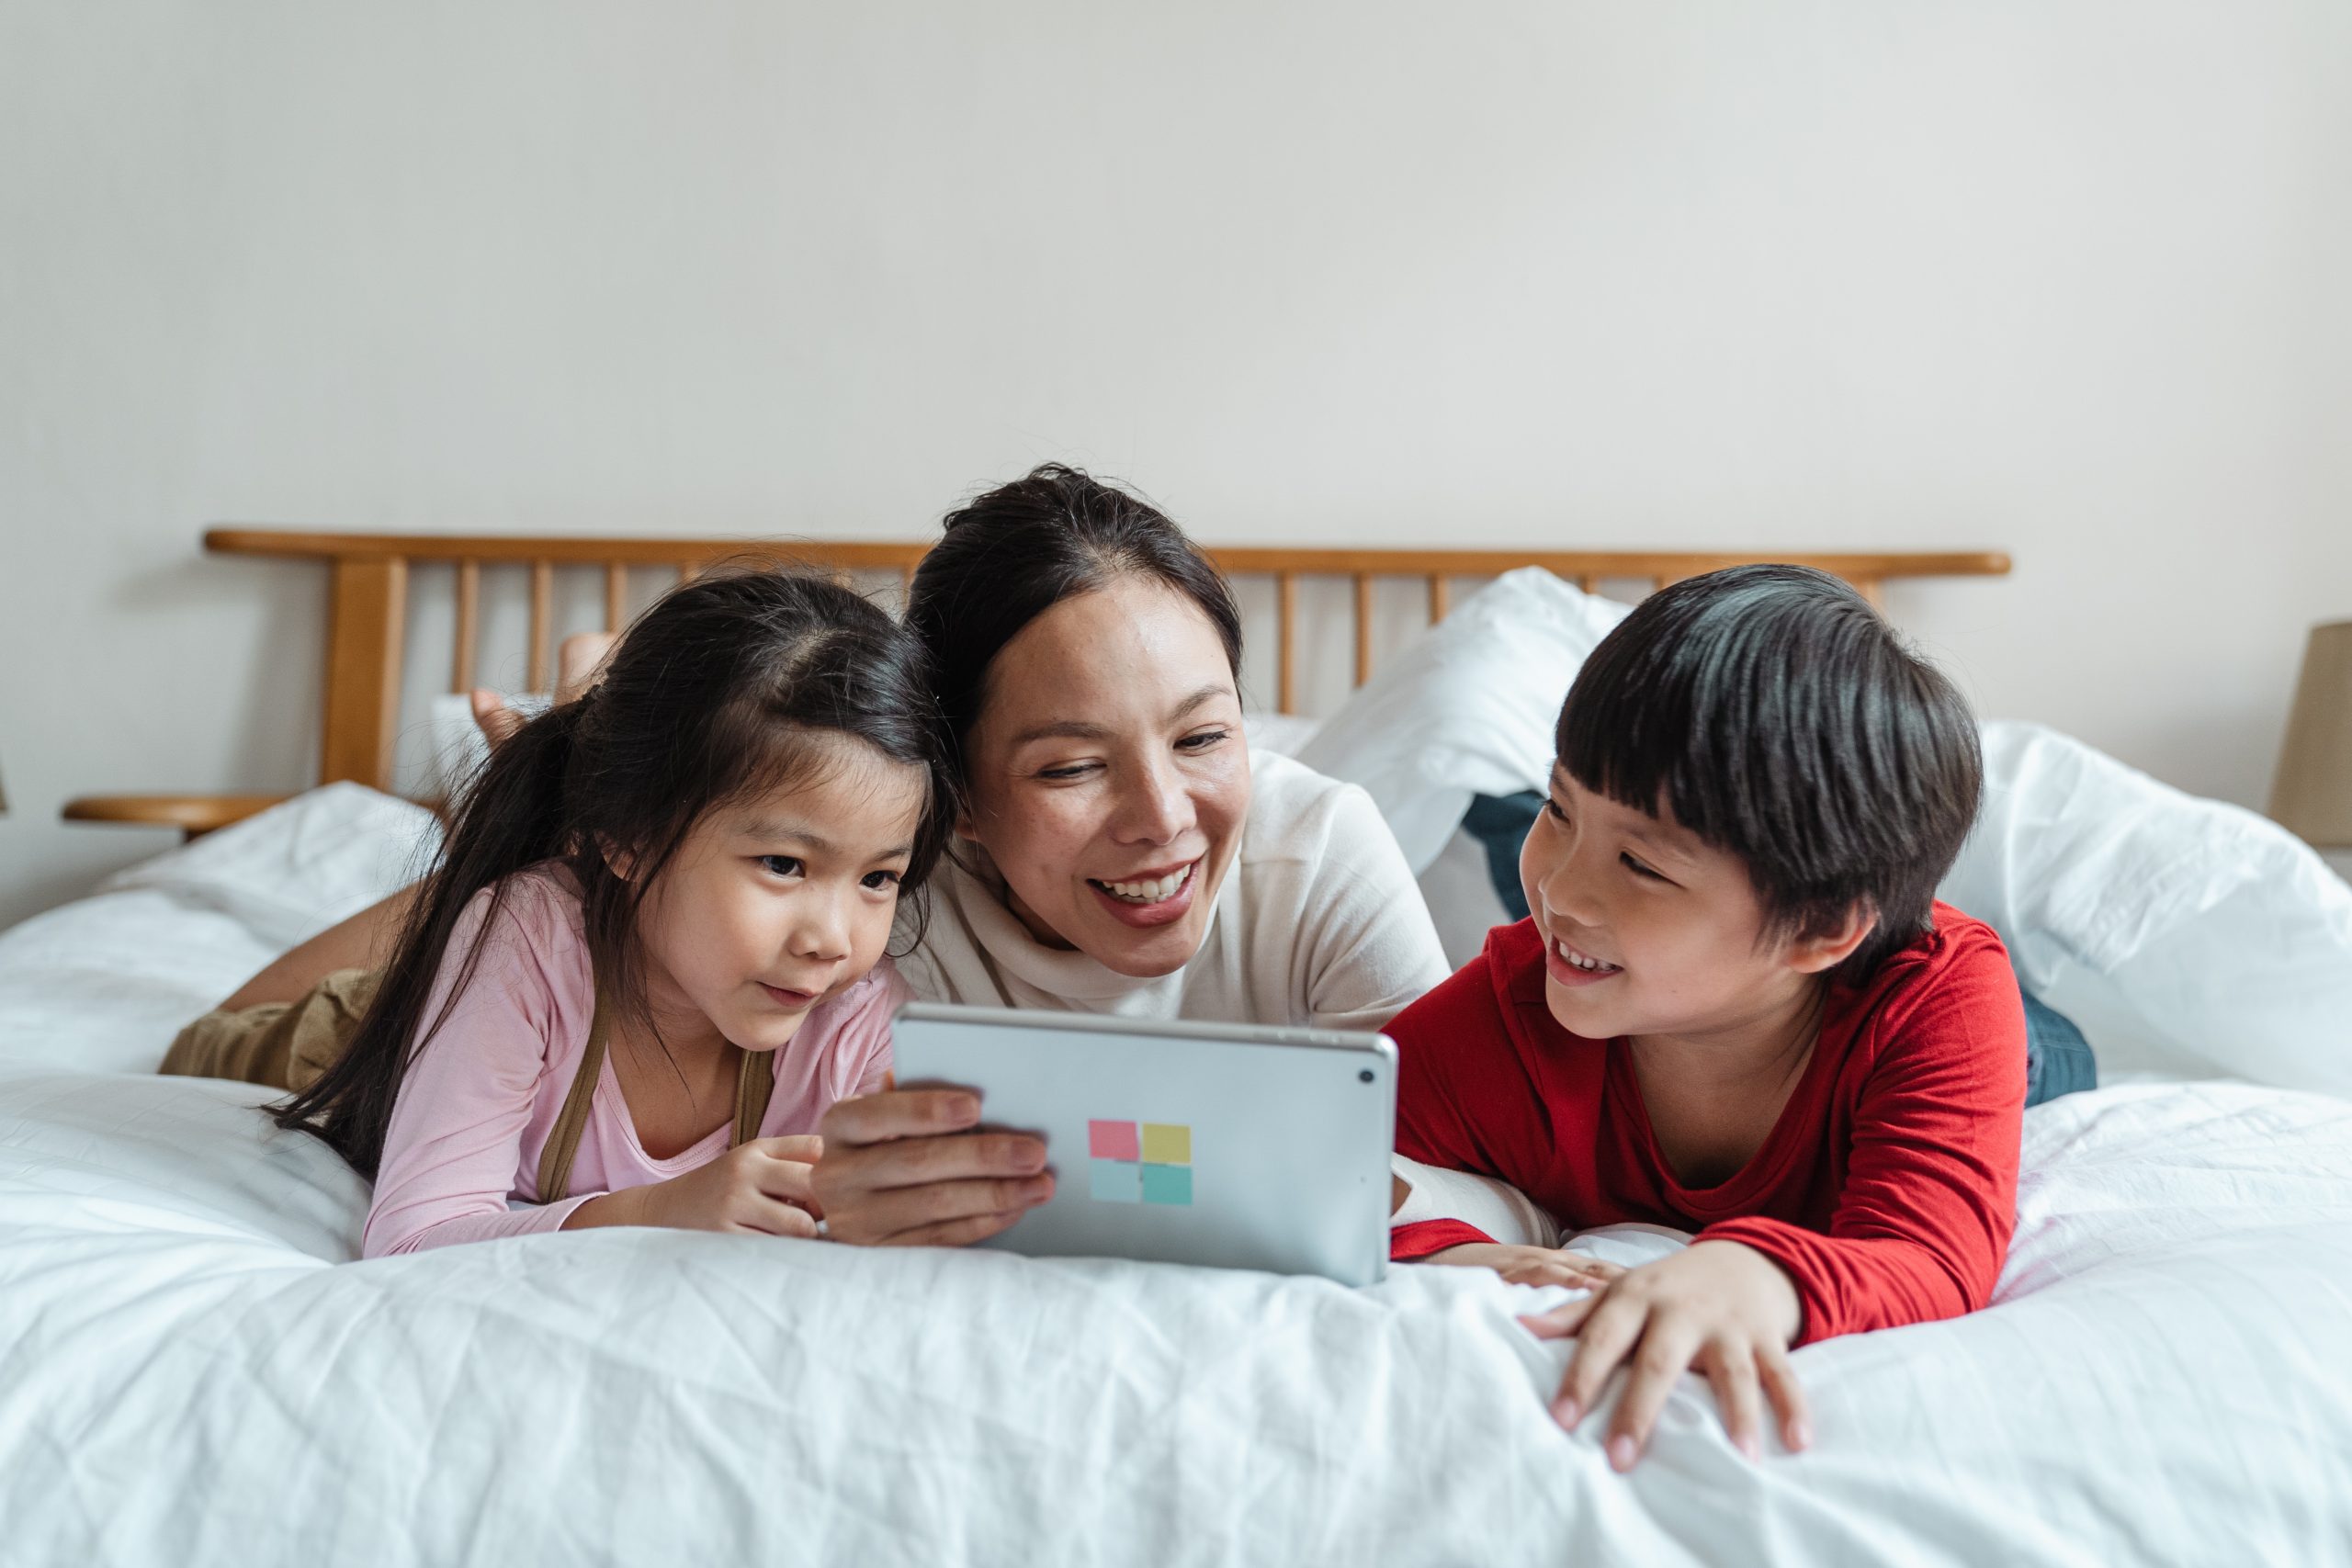 Woman on bed with her two kids. Mother is looking at an Ipad.